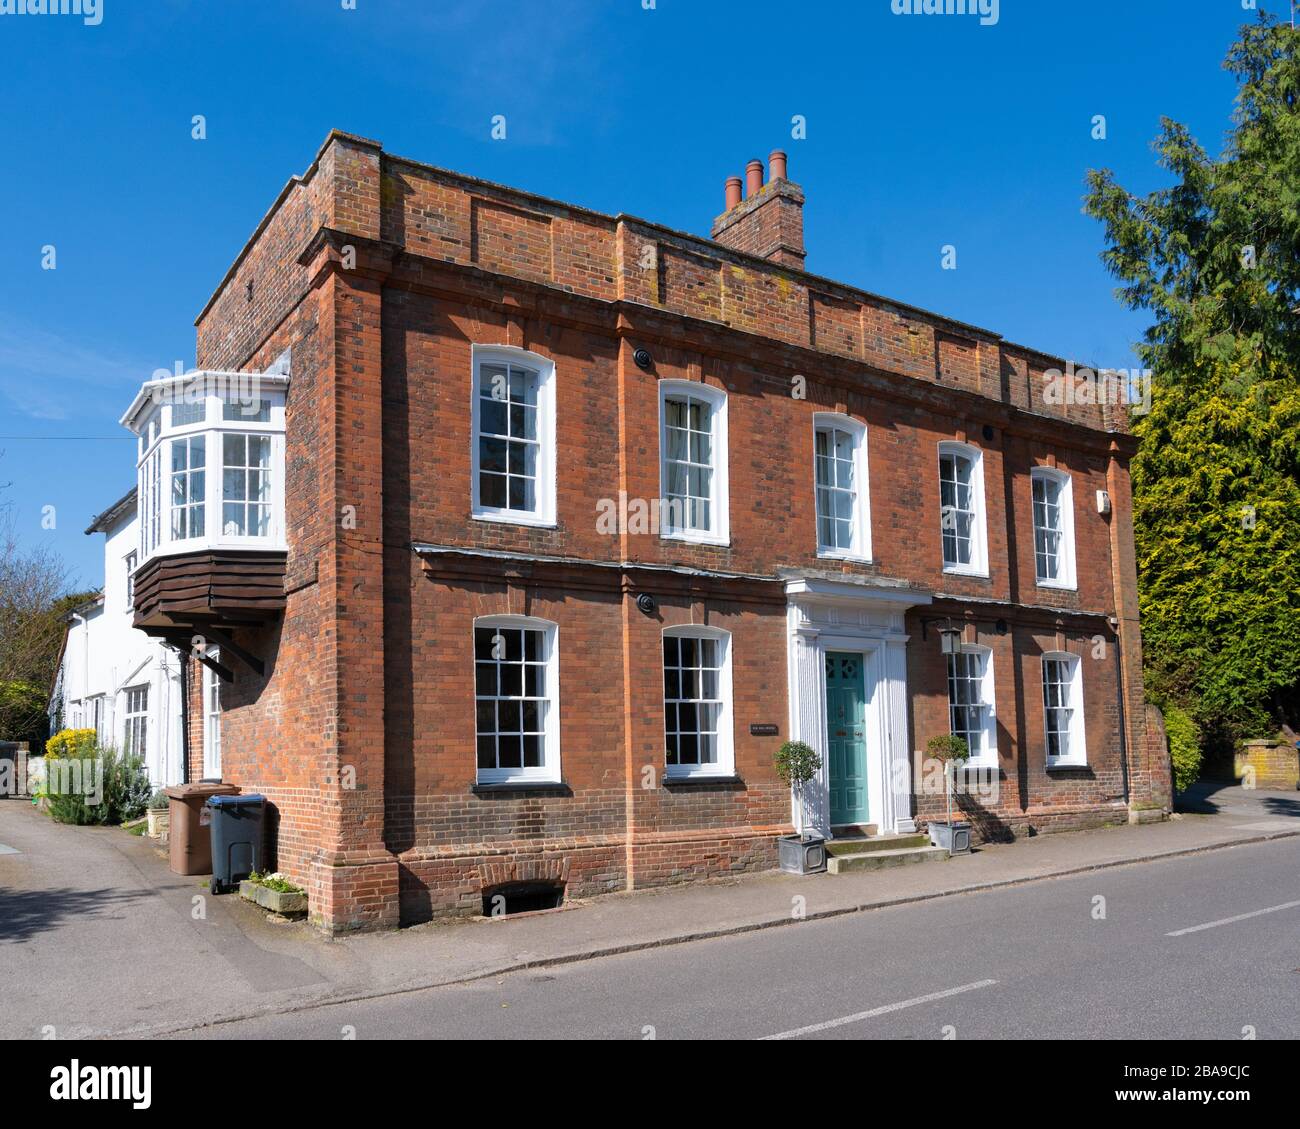 The Red House, A Grade 2 listed building in Much Hadham High Street, Much Hadham, Hertfordshire. UK. Stock Photo